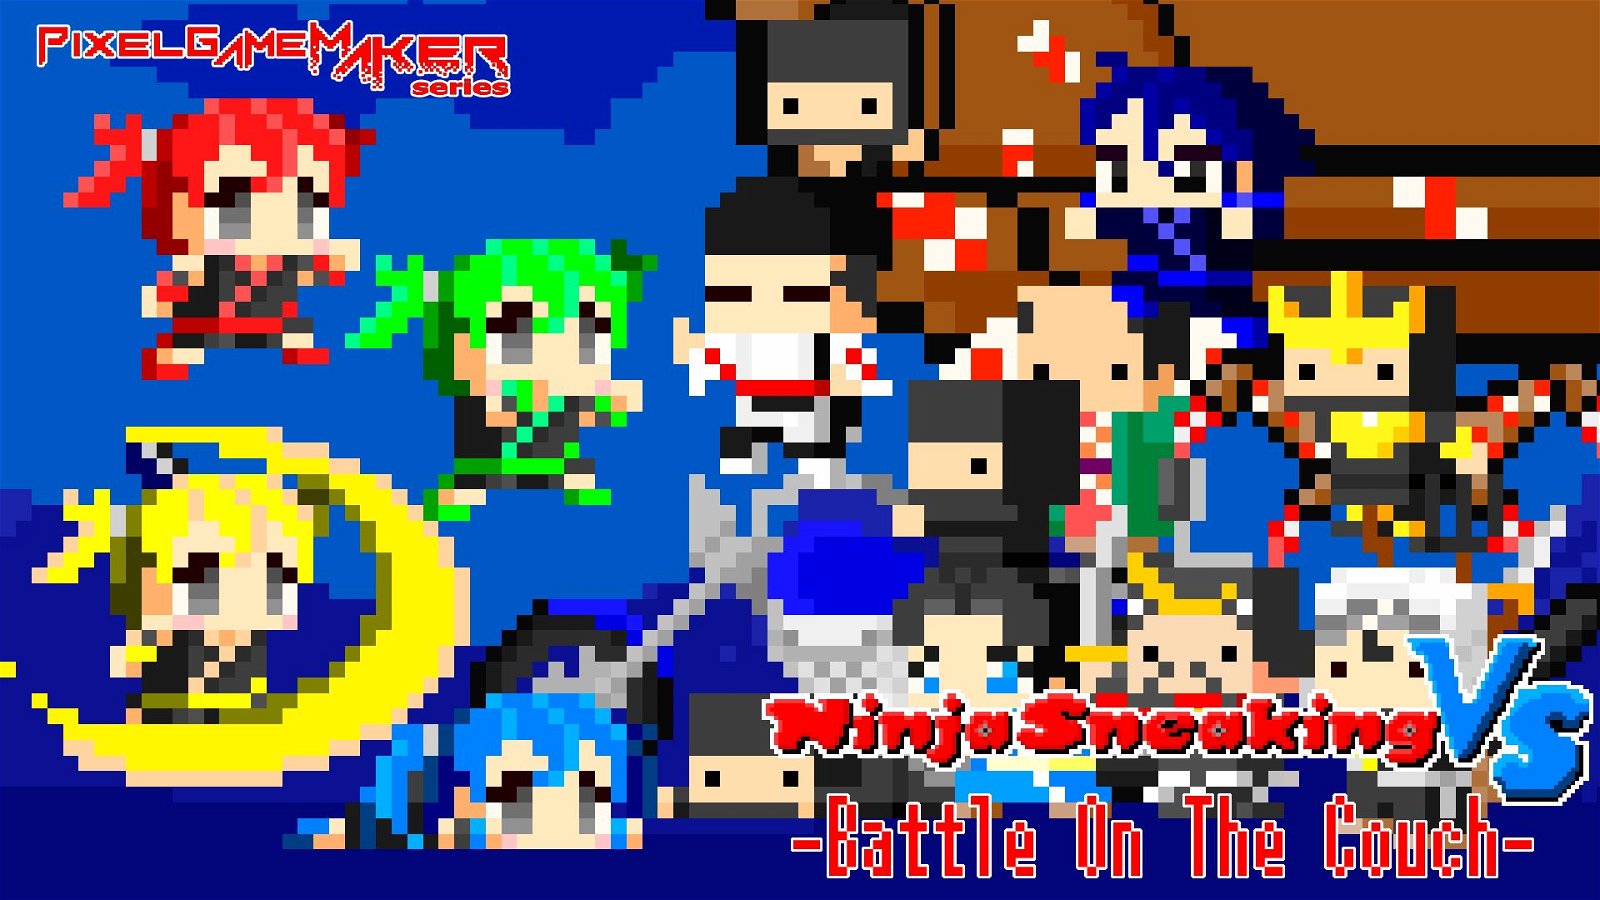 Image of Pixel Game Maker Series Ninja Sneaking VS: Battle On The Couch